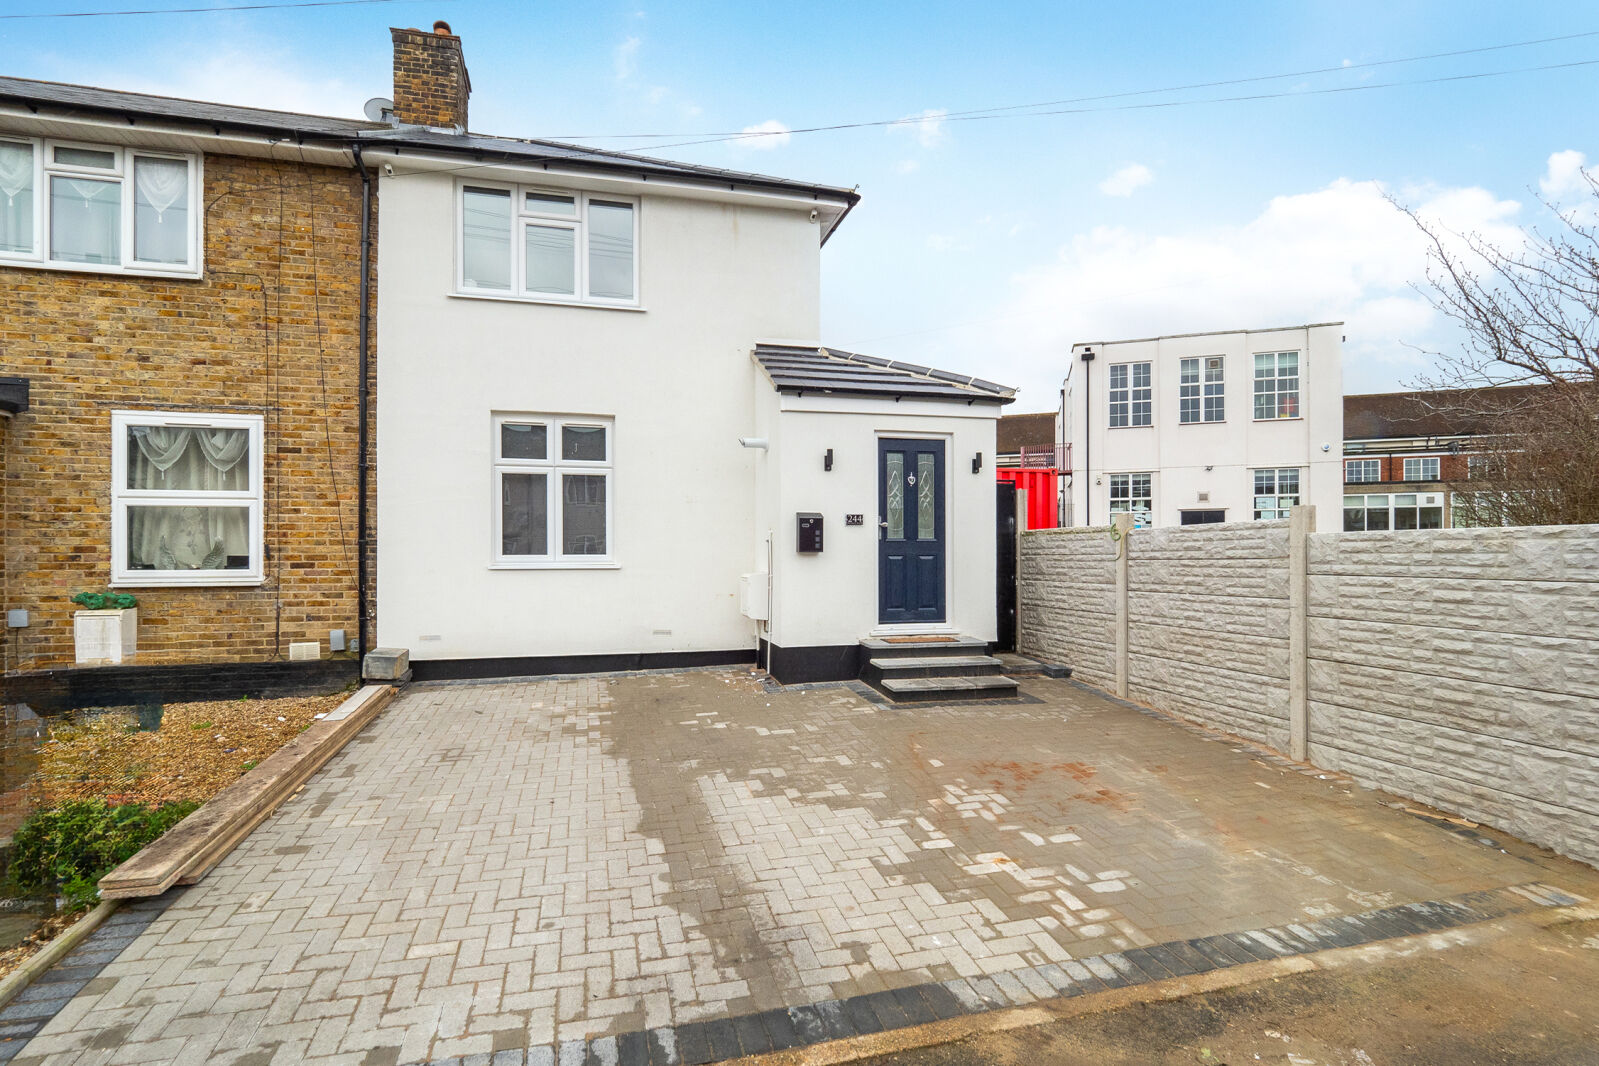 3 bedroom end terraced house for sale Welbeck Road, Carshalton, SM5, main image